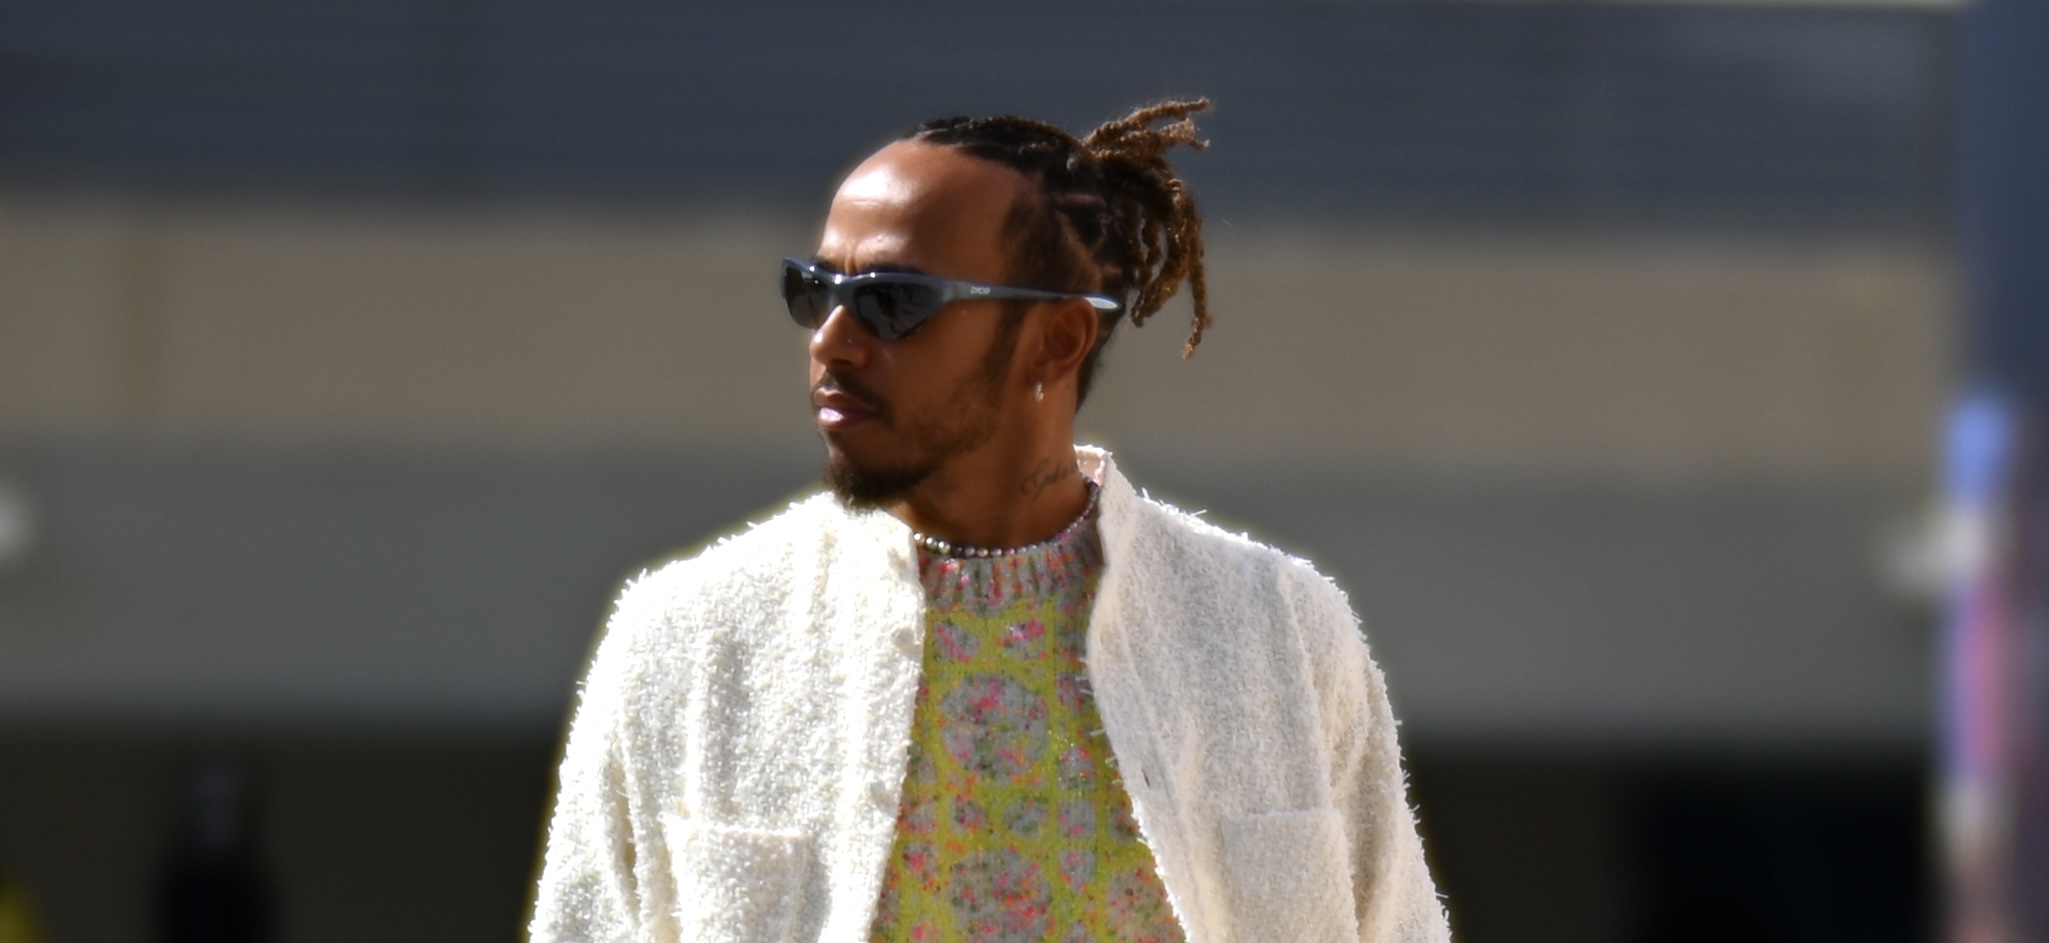 Lewis Hamilton walks in the Paddock at the Abu Dhabi Grand Prix, wearing a cream cardigan, floral turtleneck, and neon green sneakers.